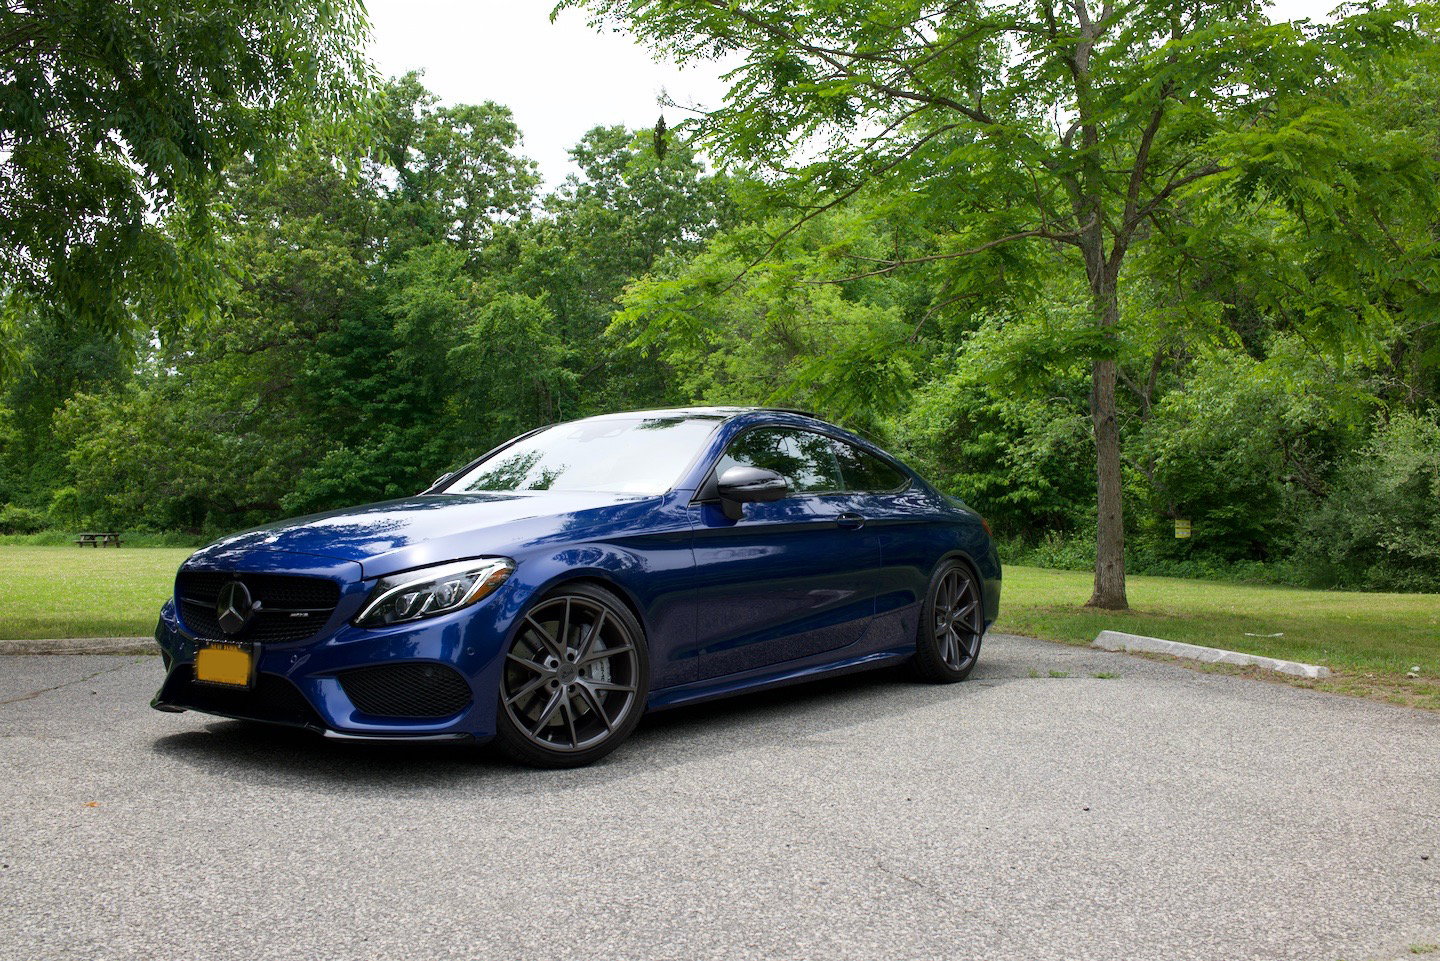 2017 Mercedes-Benz C43 AMG - Lease transfer 2017 Mercedes-AMG C43 Coupe - Used - VIN VINWDDWJ6EB3HF520 - 22,000 Miles - 6 cyl - AWD - Automatic - Coupe - Blue - Brooklyn, NY 11201, United States